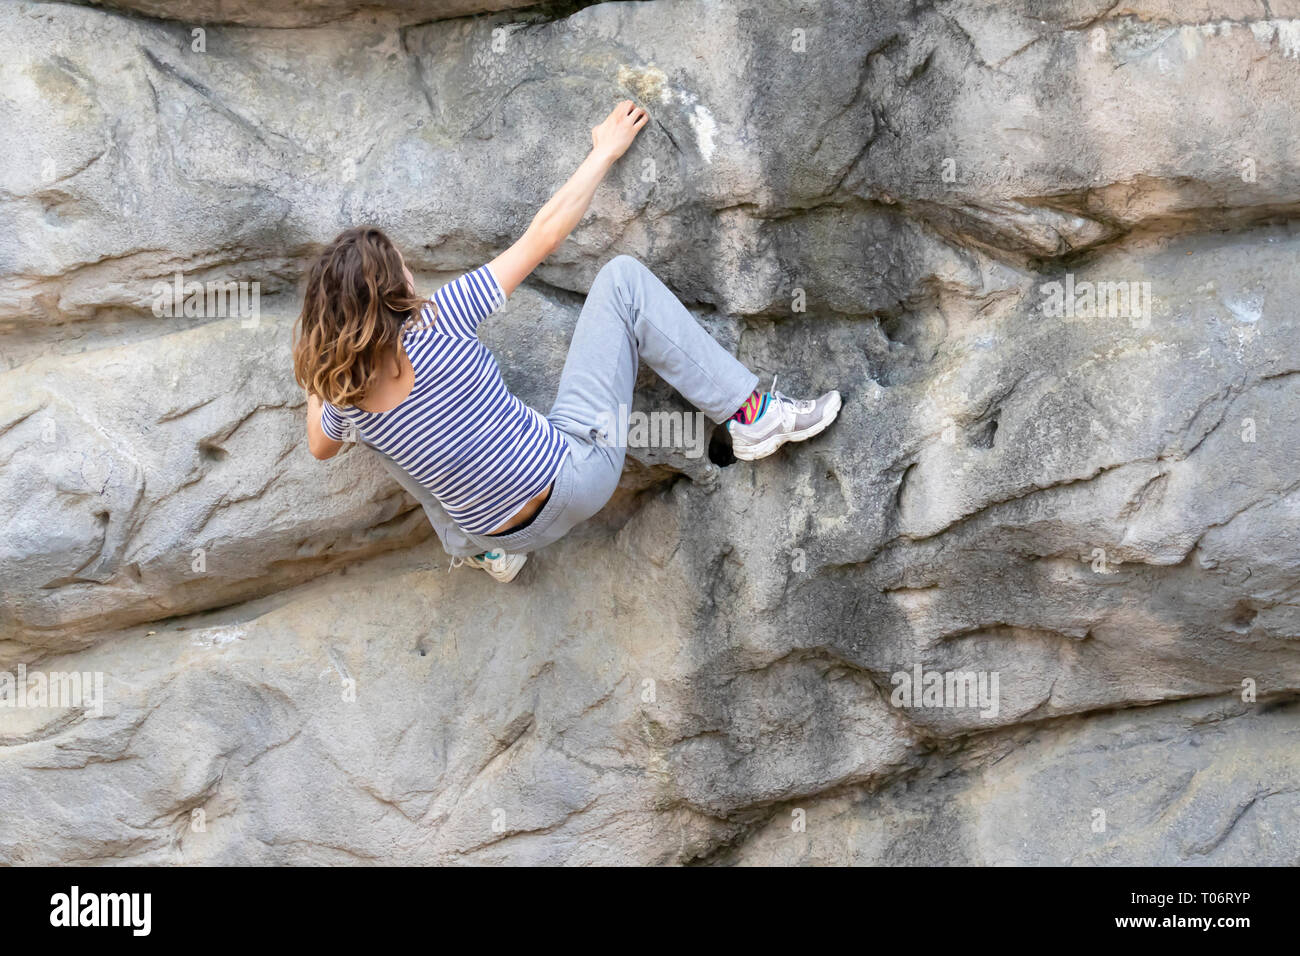 Young woman with long hair hanging on a rocky face of a mountain while climbing up without a rope support Stock Photo